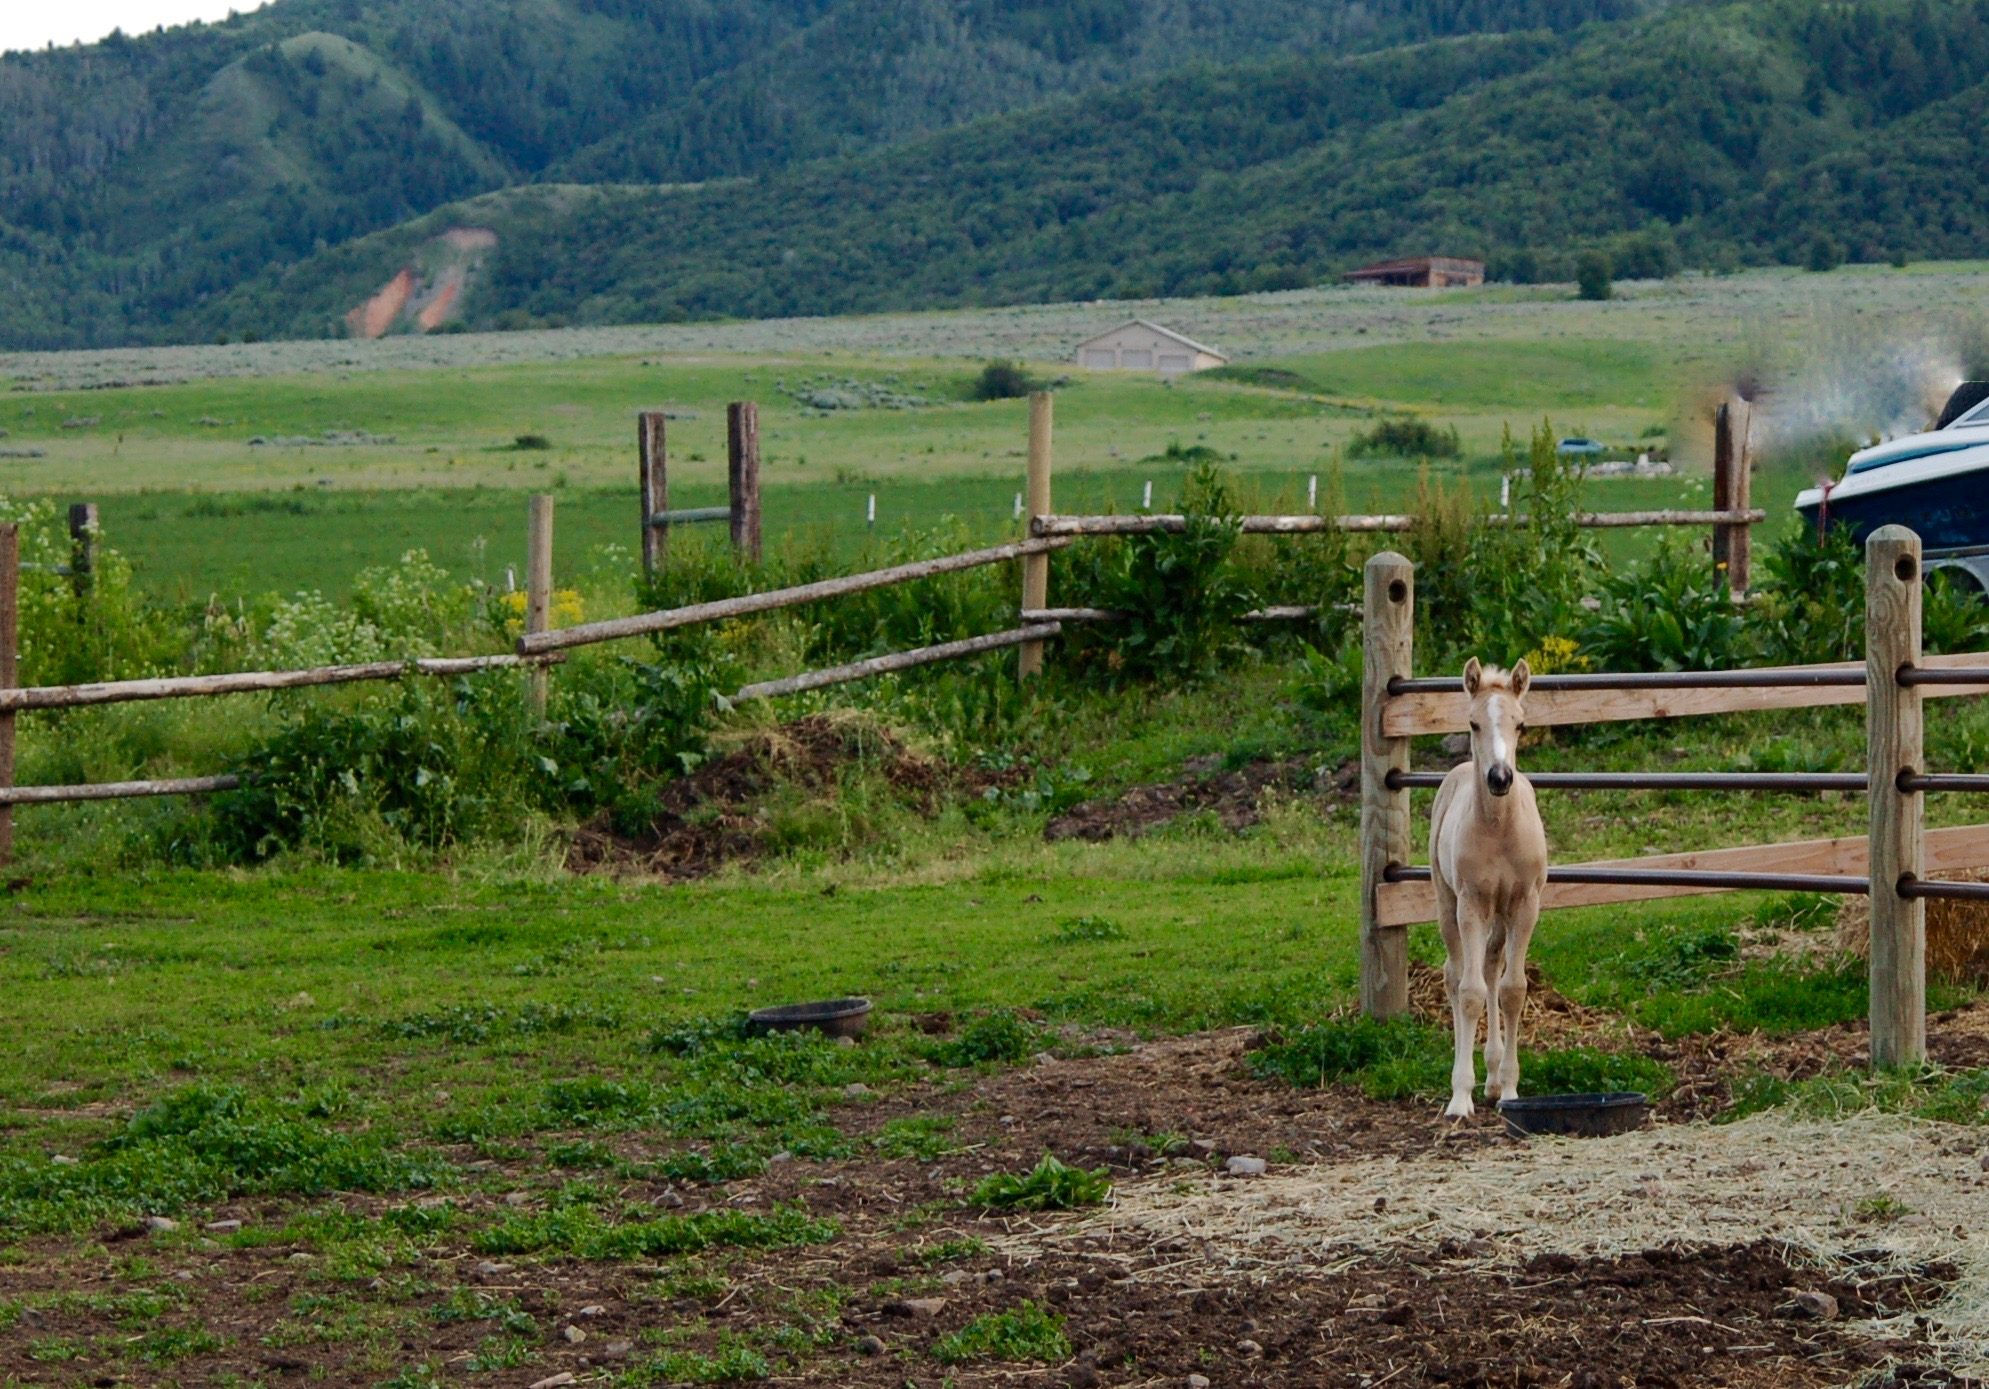 Small palamino foal in a pasture next to green mountains.